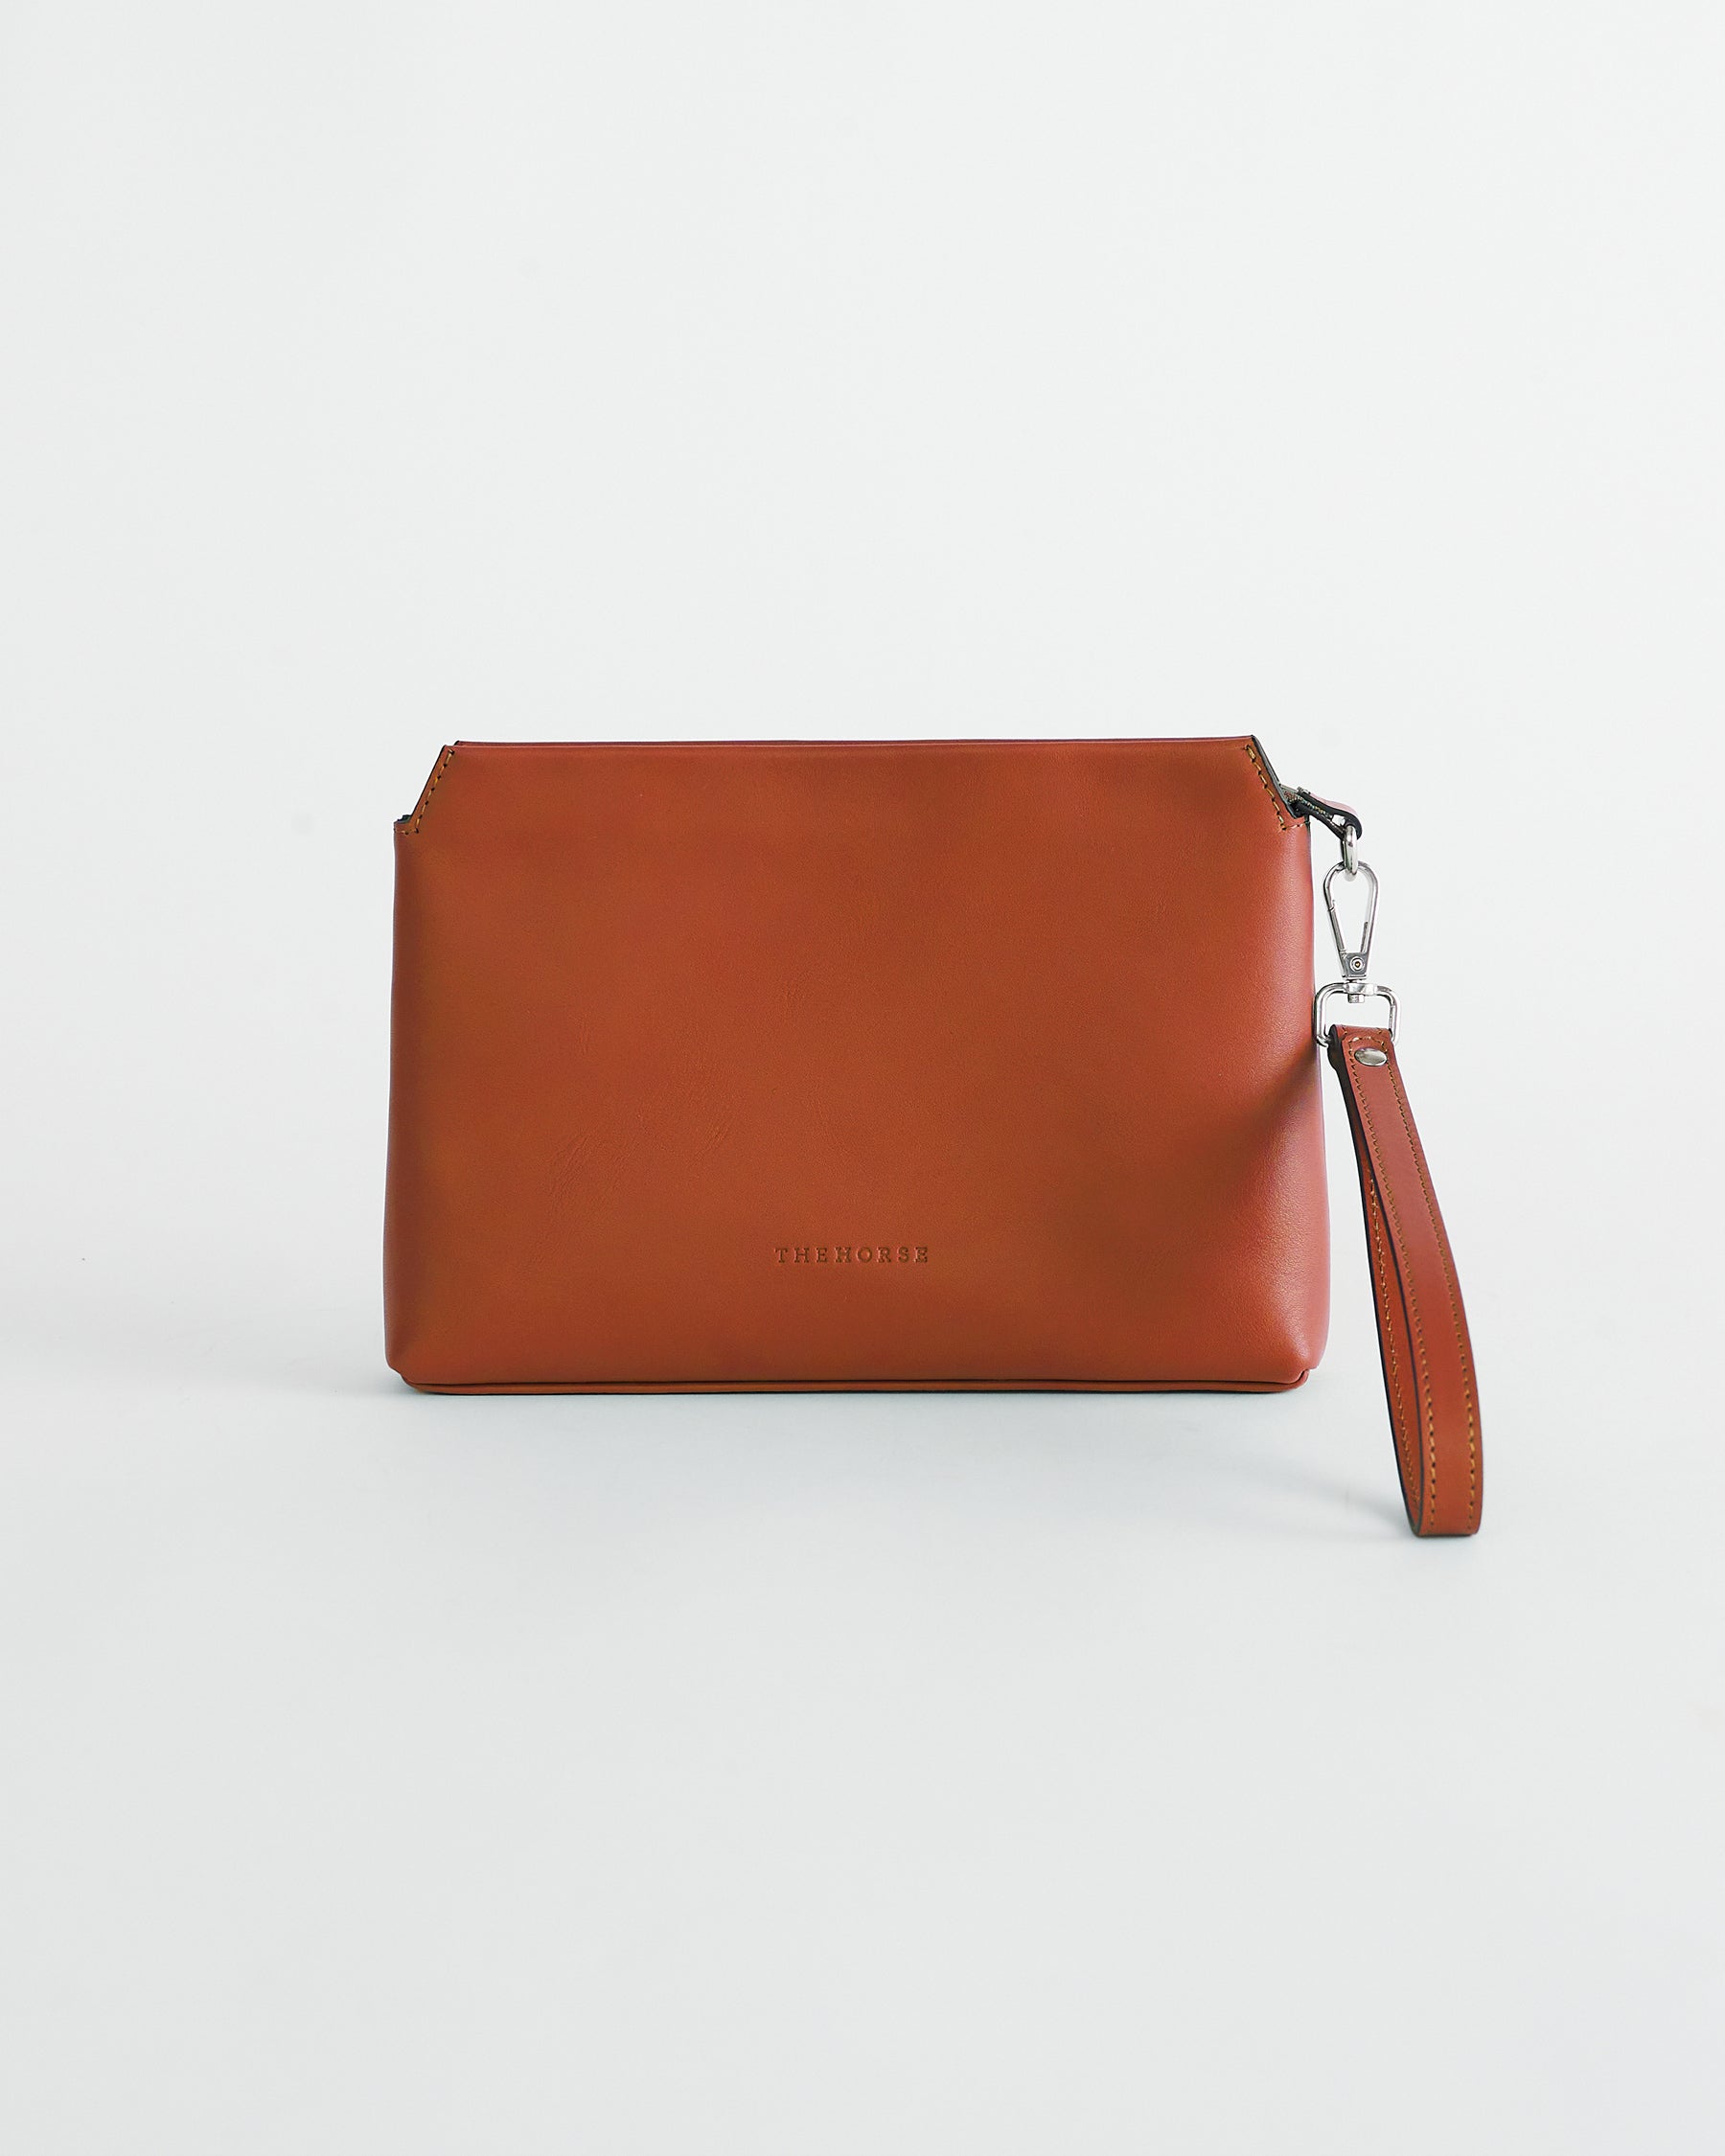 The Lola Smooth Leather Clutch in Tan by The Horse®